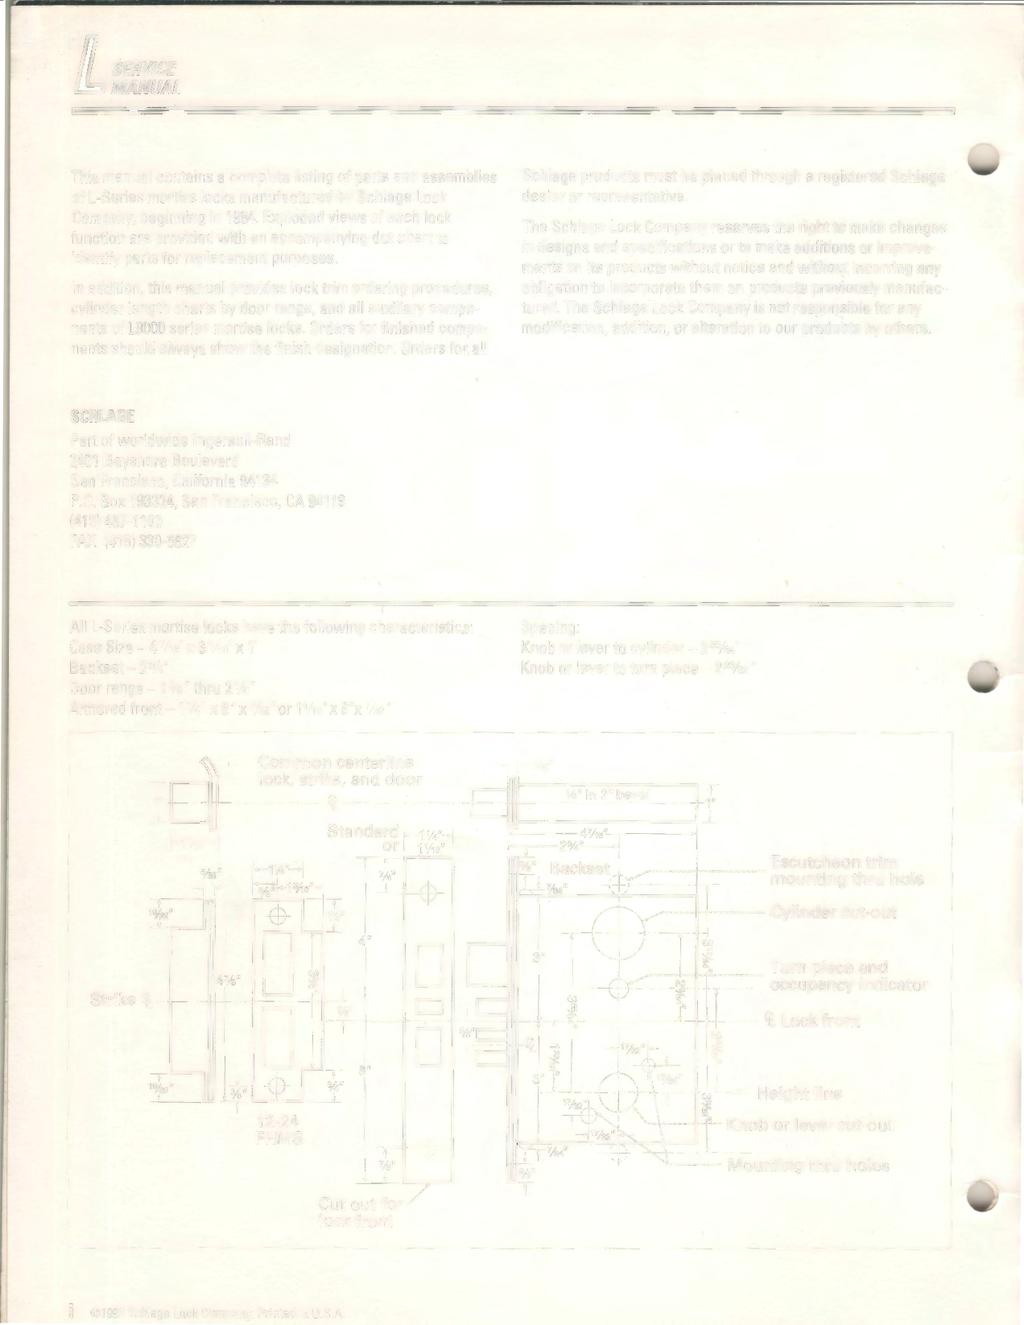 LSERVICE This manual contains a complete listing of parts and assemblies of L-Series mortise locks manufactured by Schlage Lock Company, beginning in 1984.